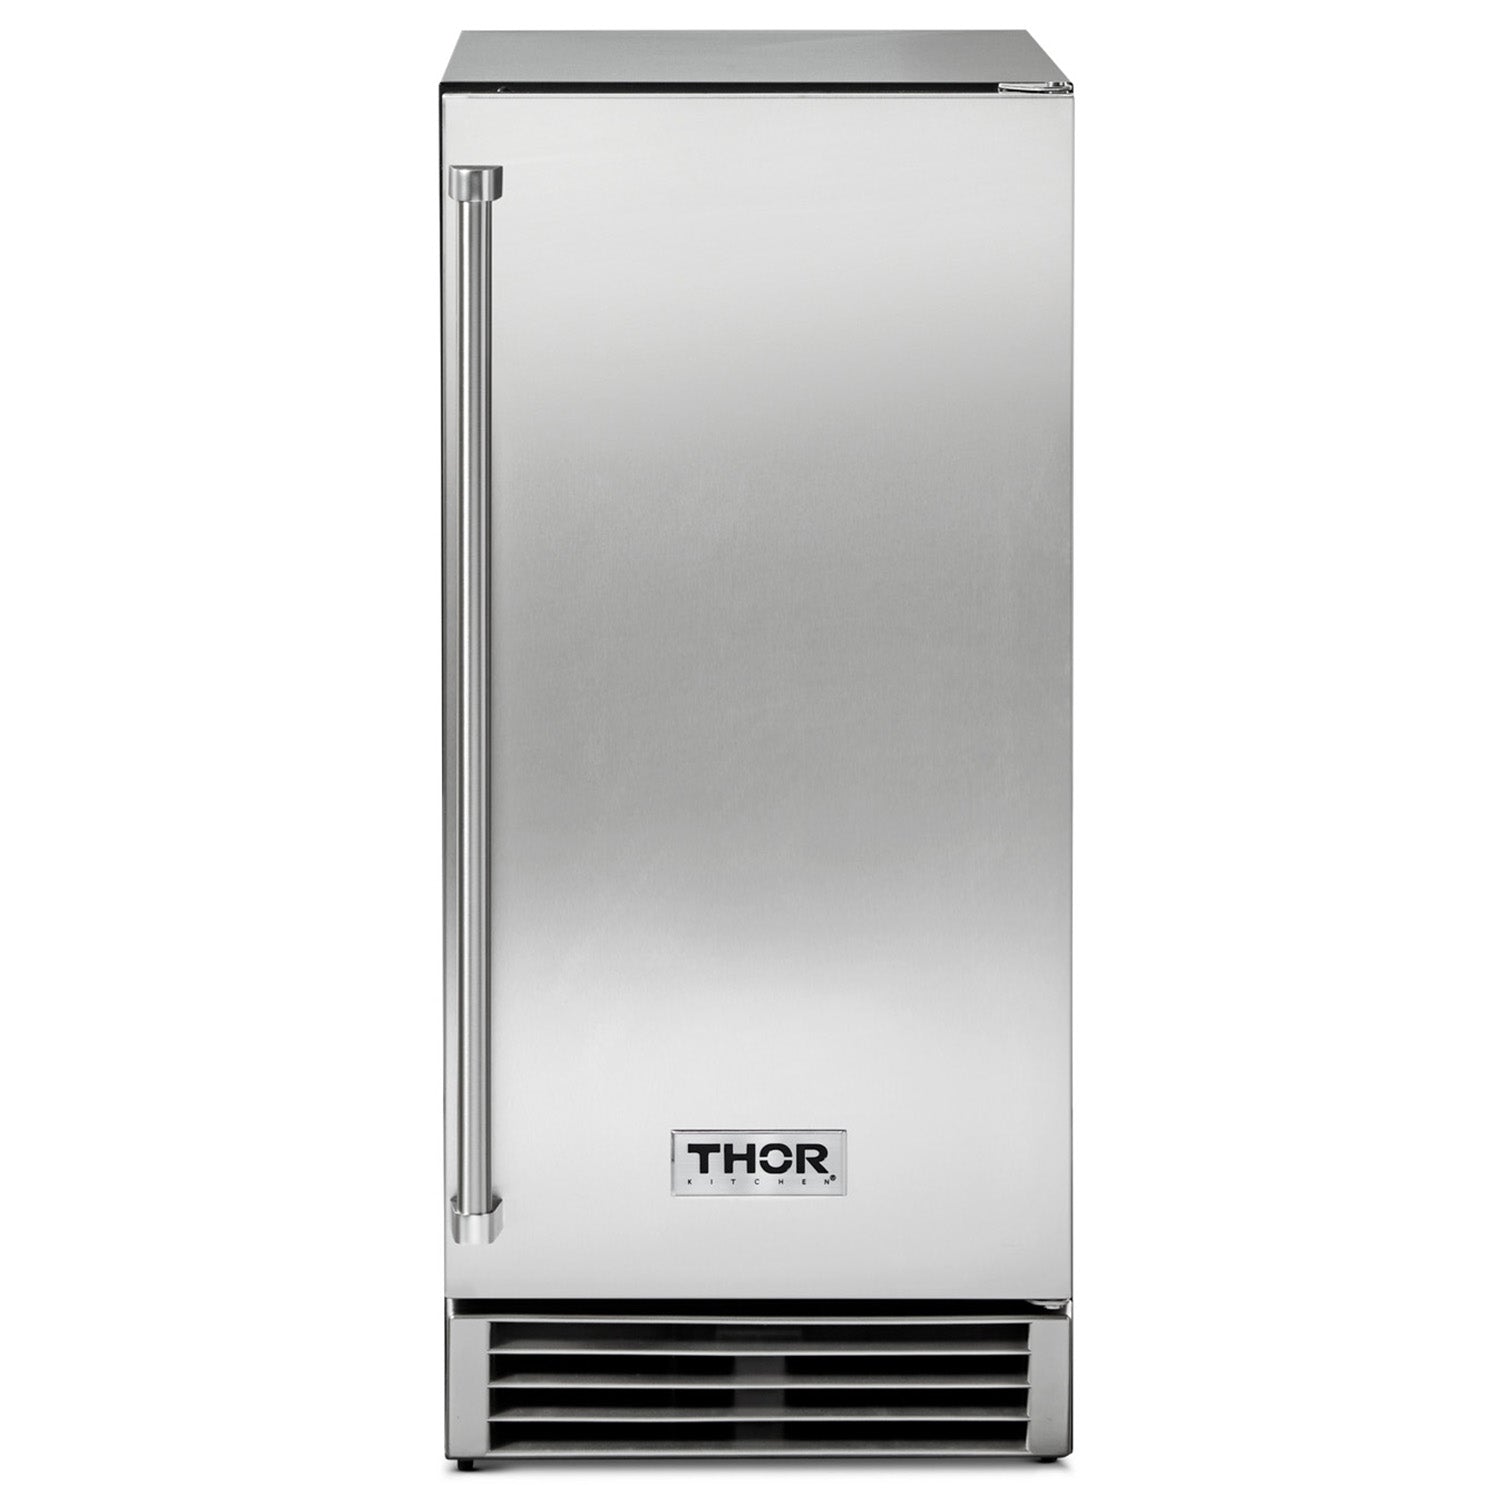 Thor Kitchen 15 Inch Built-In Ice Maker in Stainless Steel - TIM1501